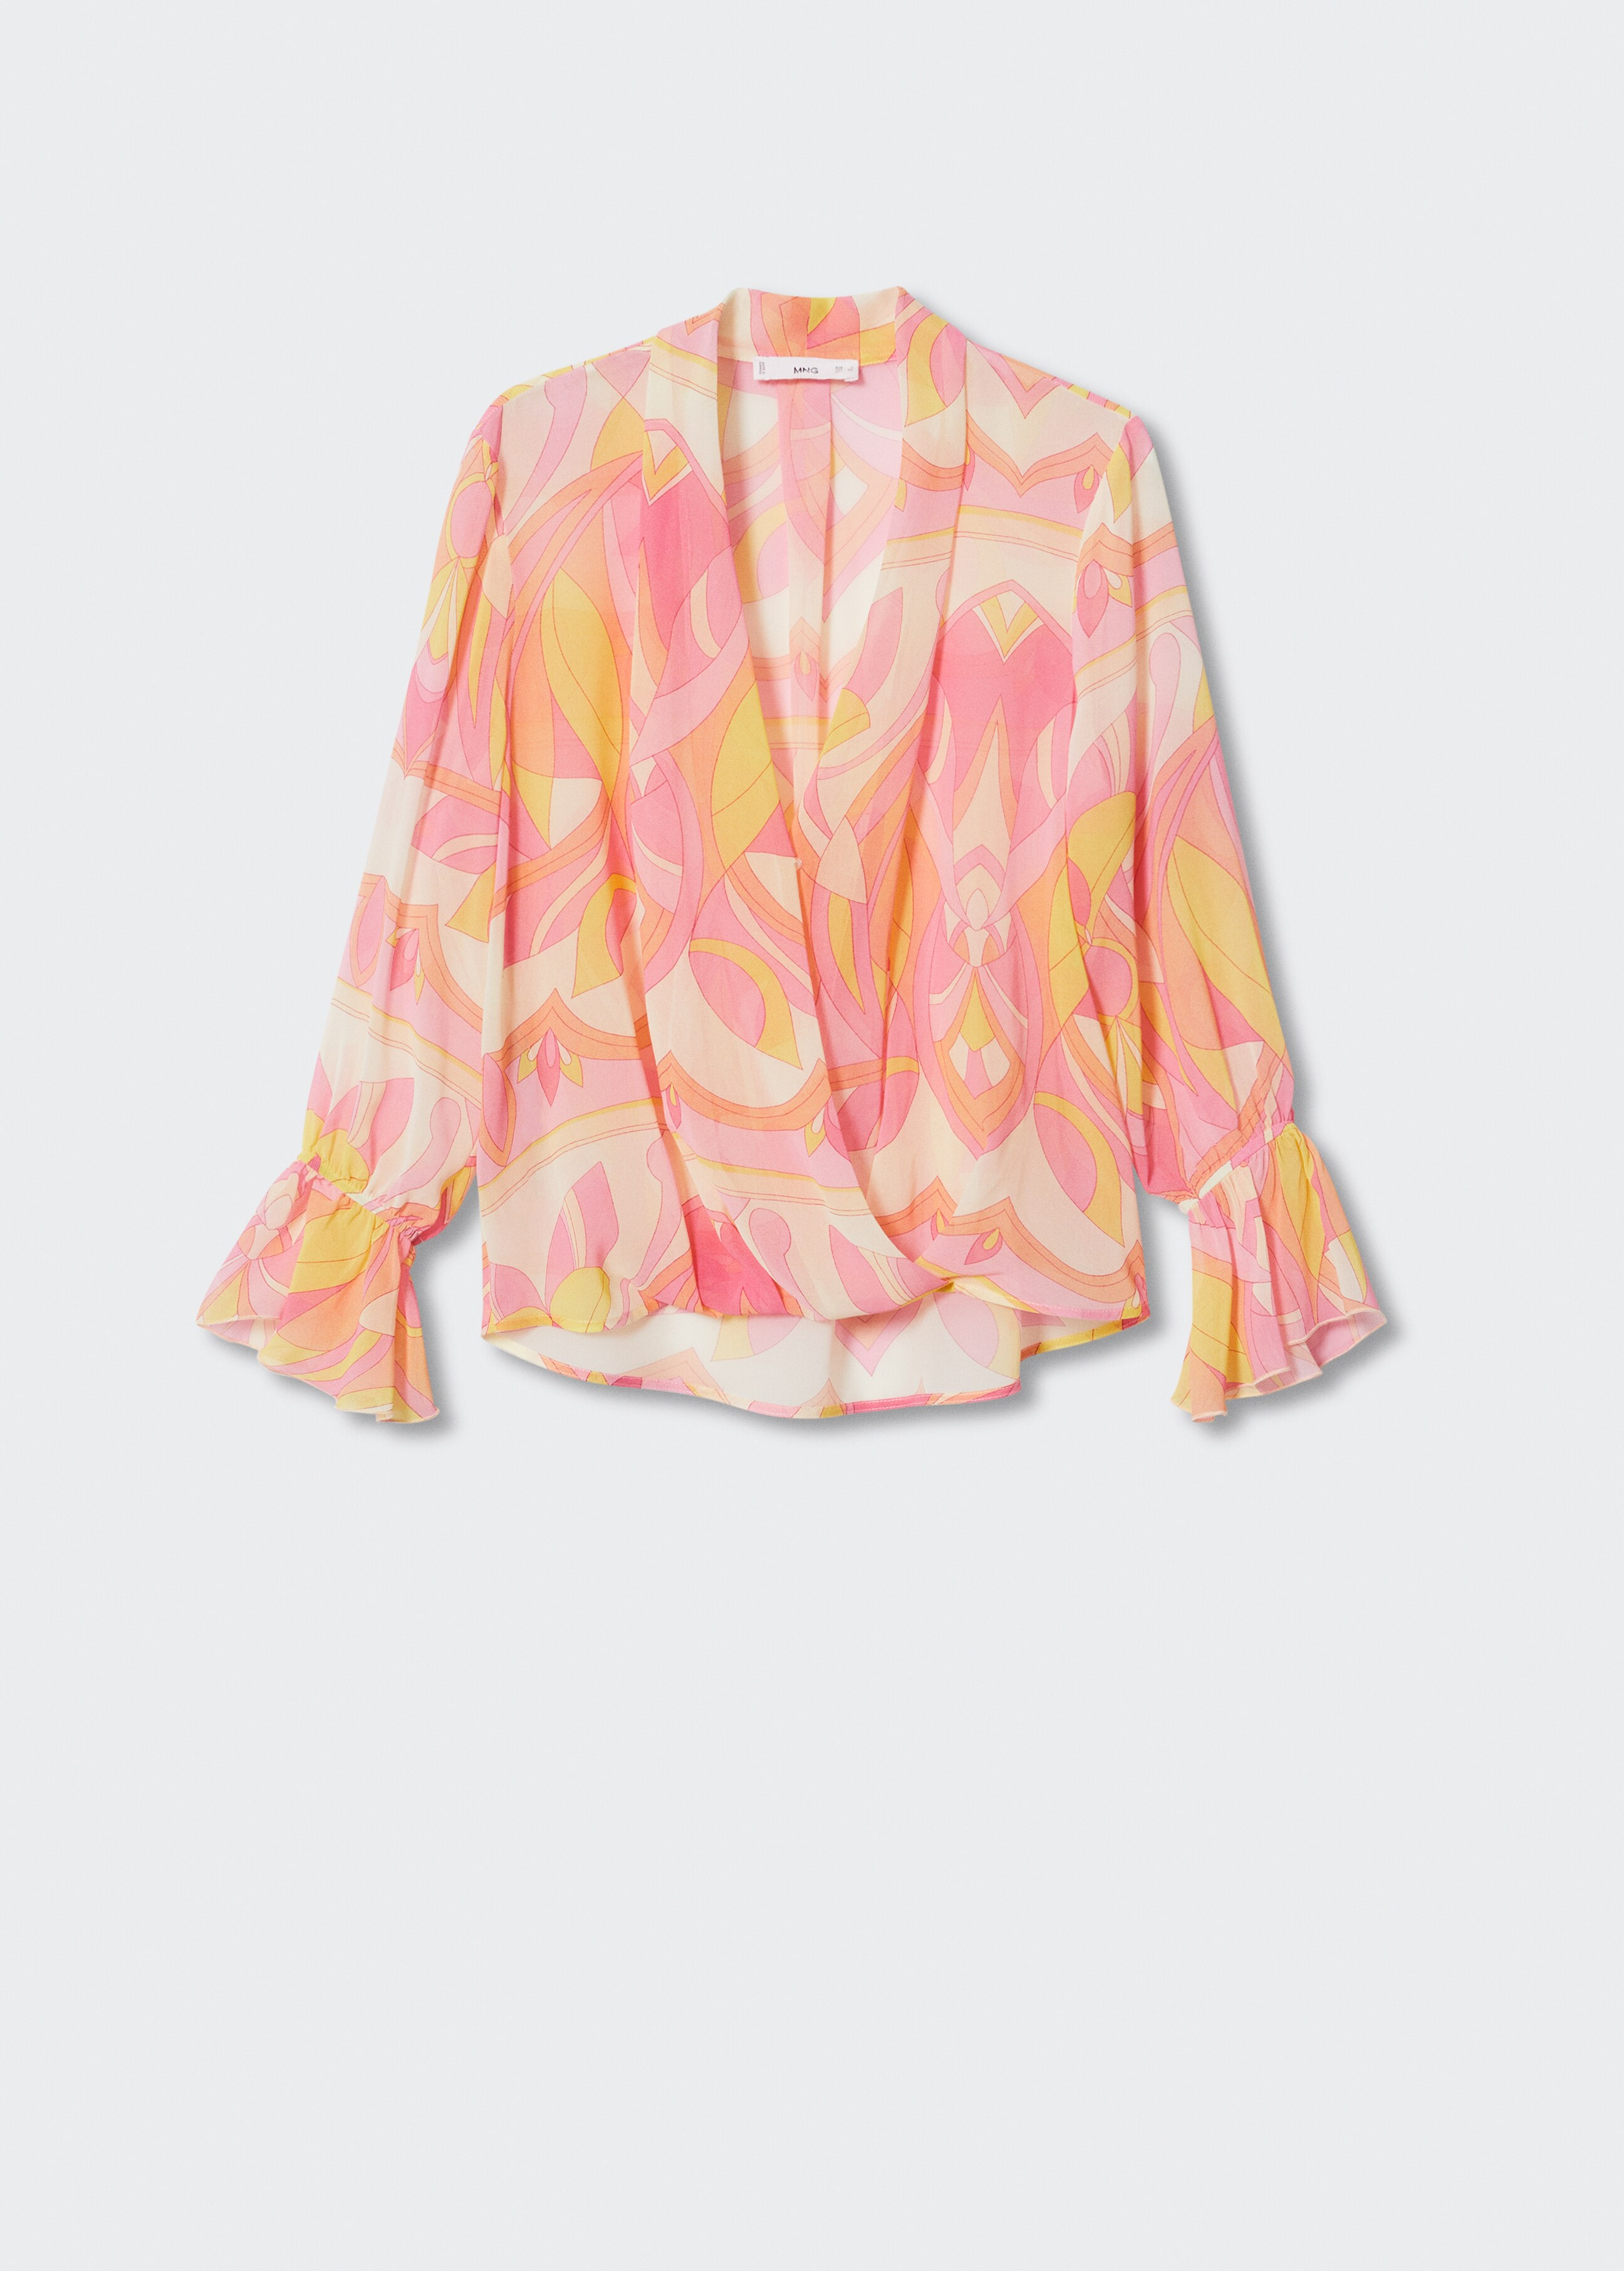 Flowy printed blouse - Article without model